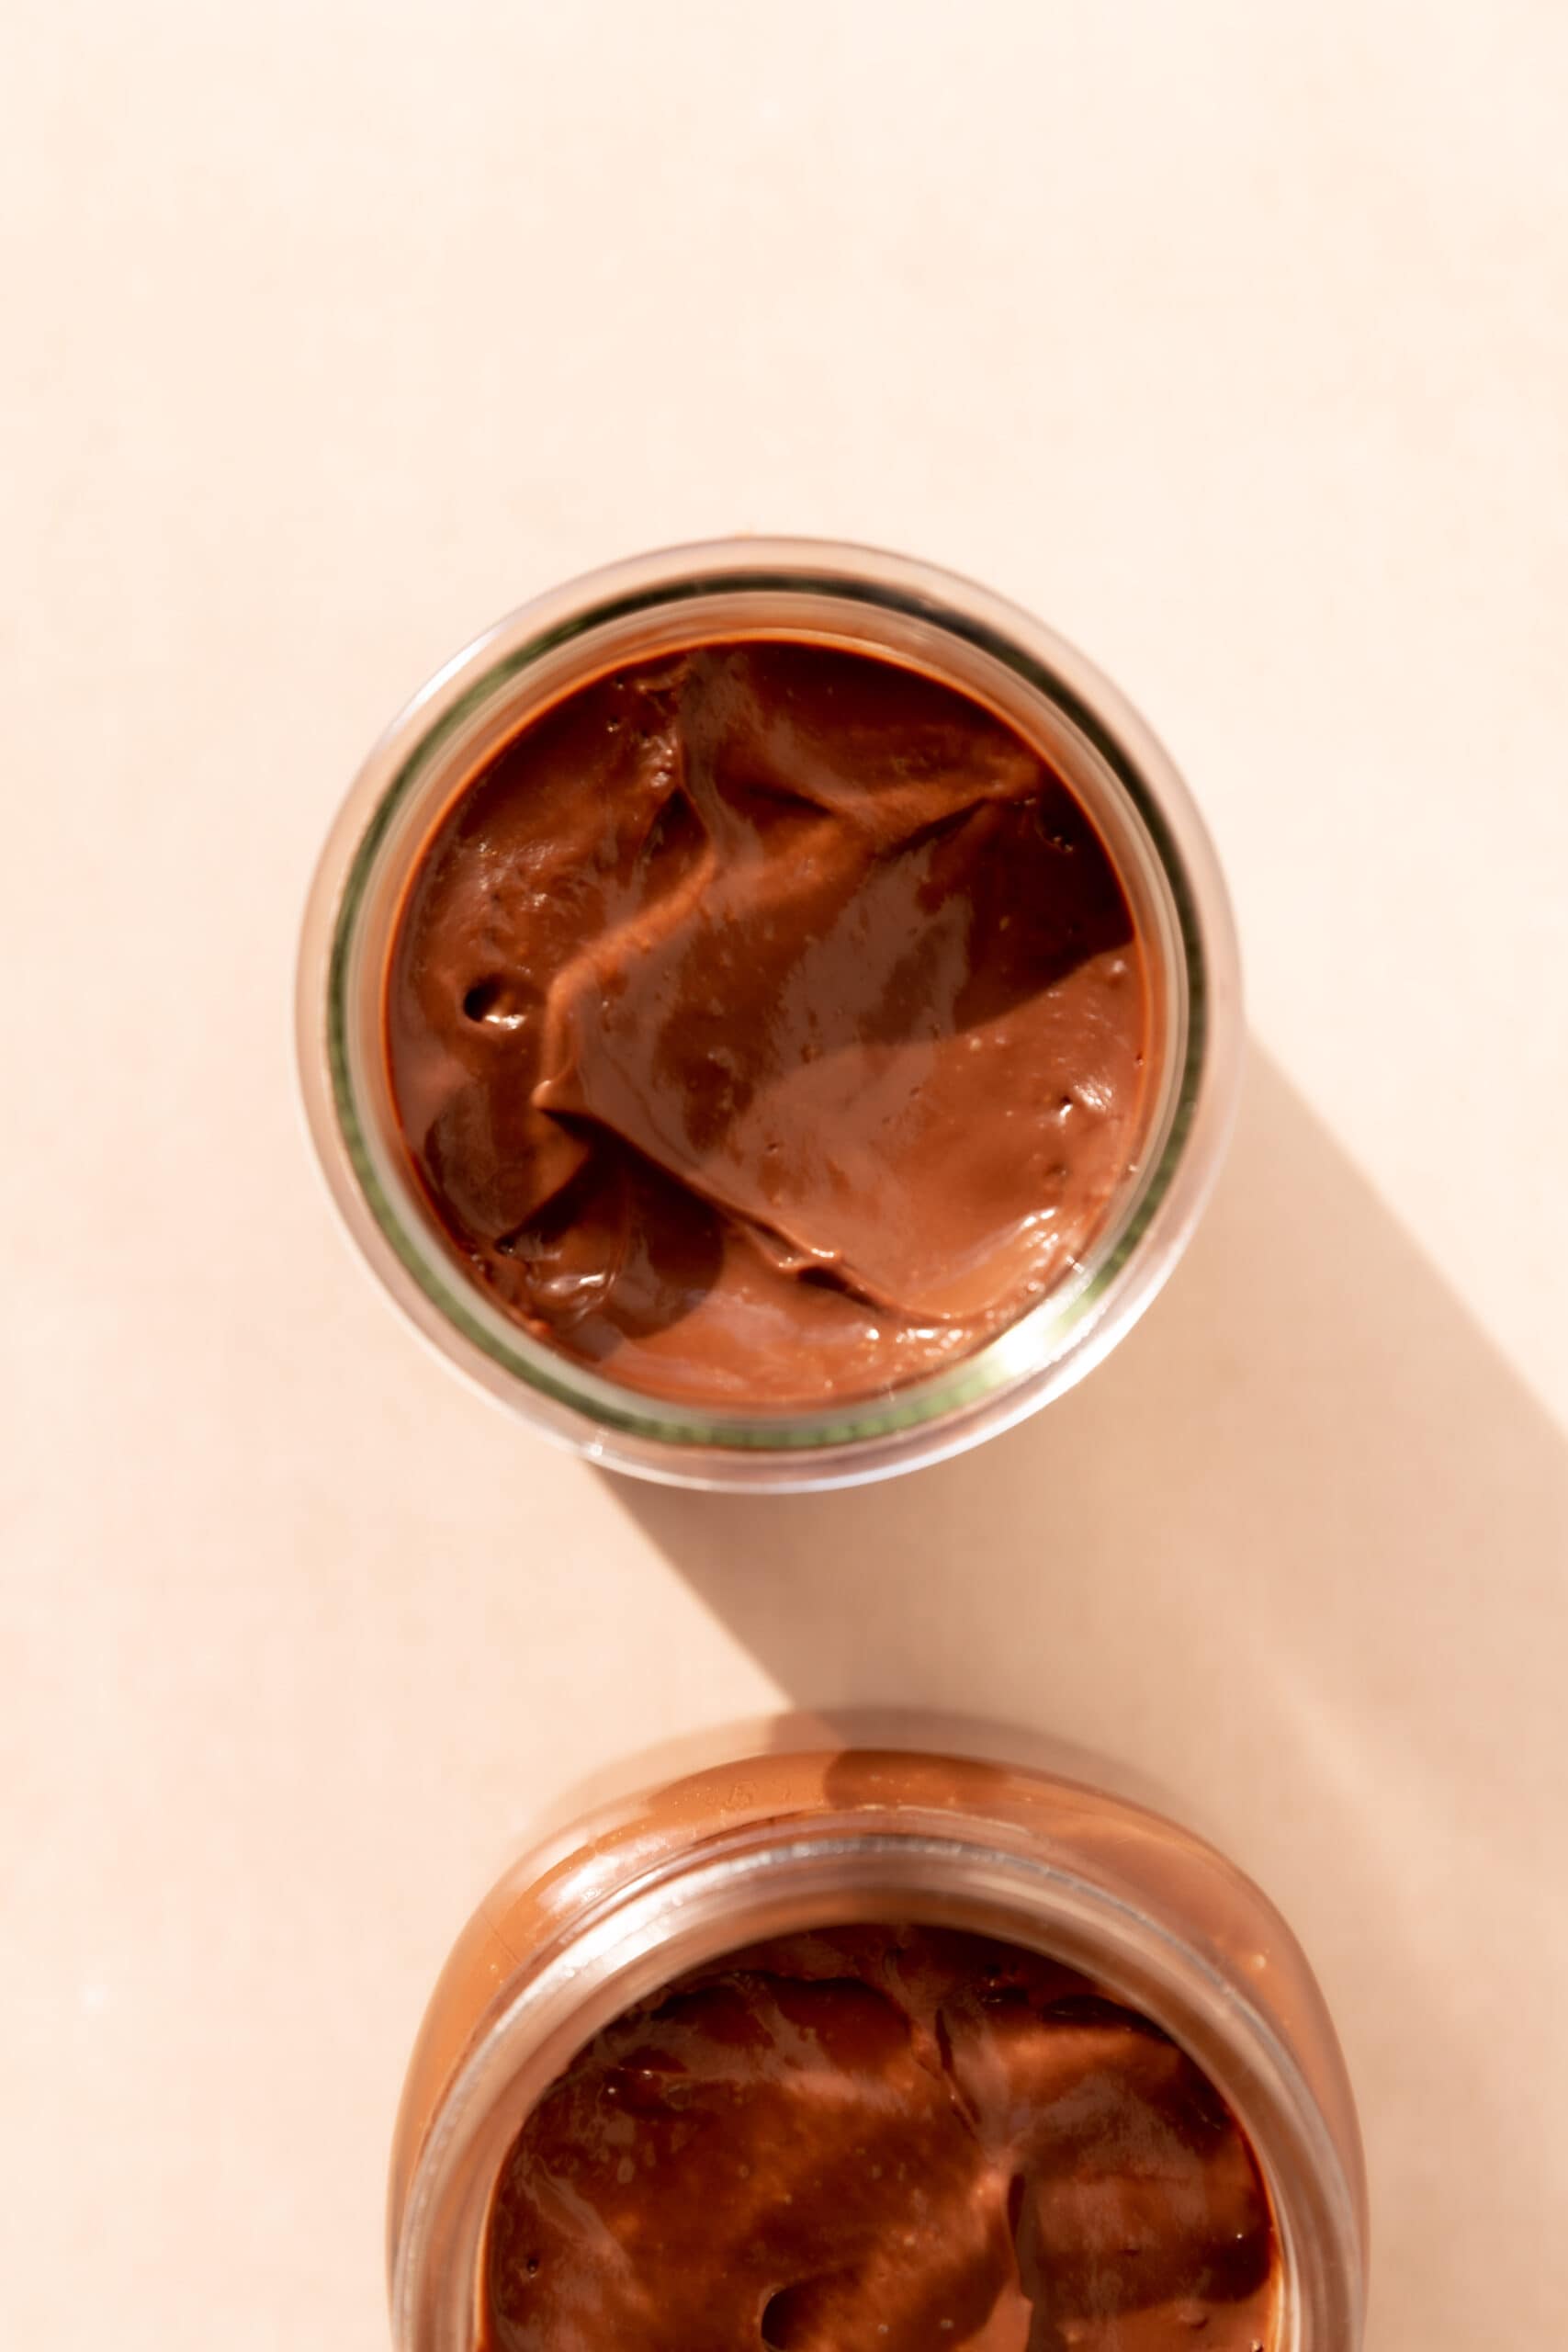 Overhead view of two little glass jars filled with creamy chocolate pudding.